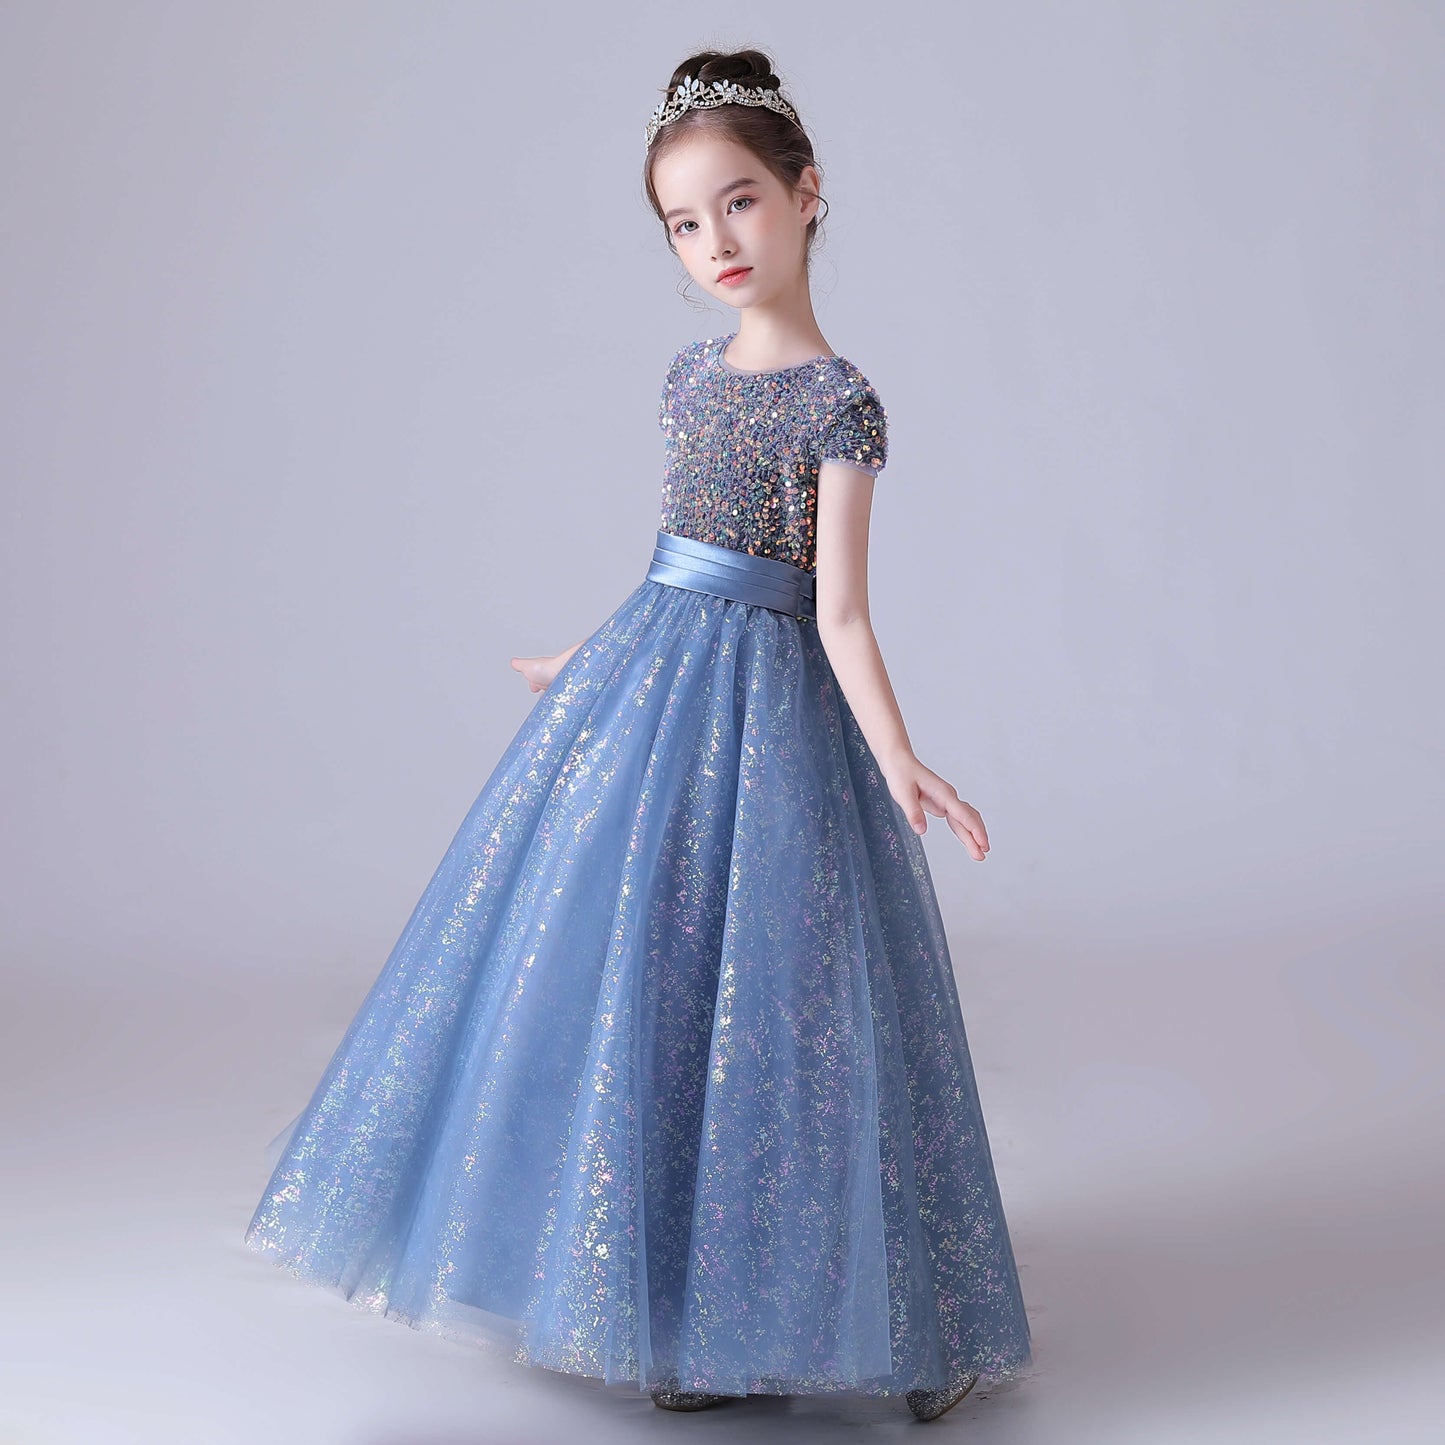 Flower Girl Dresses For Wedding Bridesmaid Sequins Tulle Puffy Skirt Girls Birthday Party Gown Floor Length